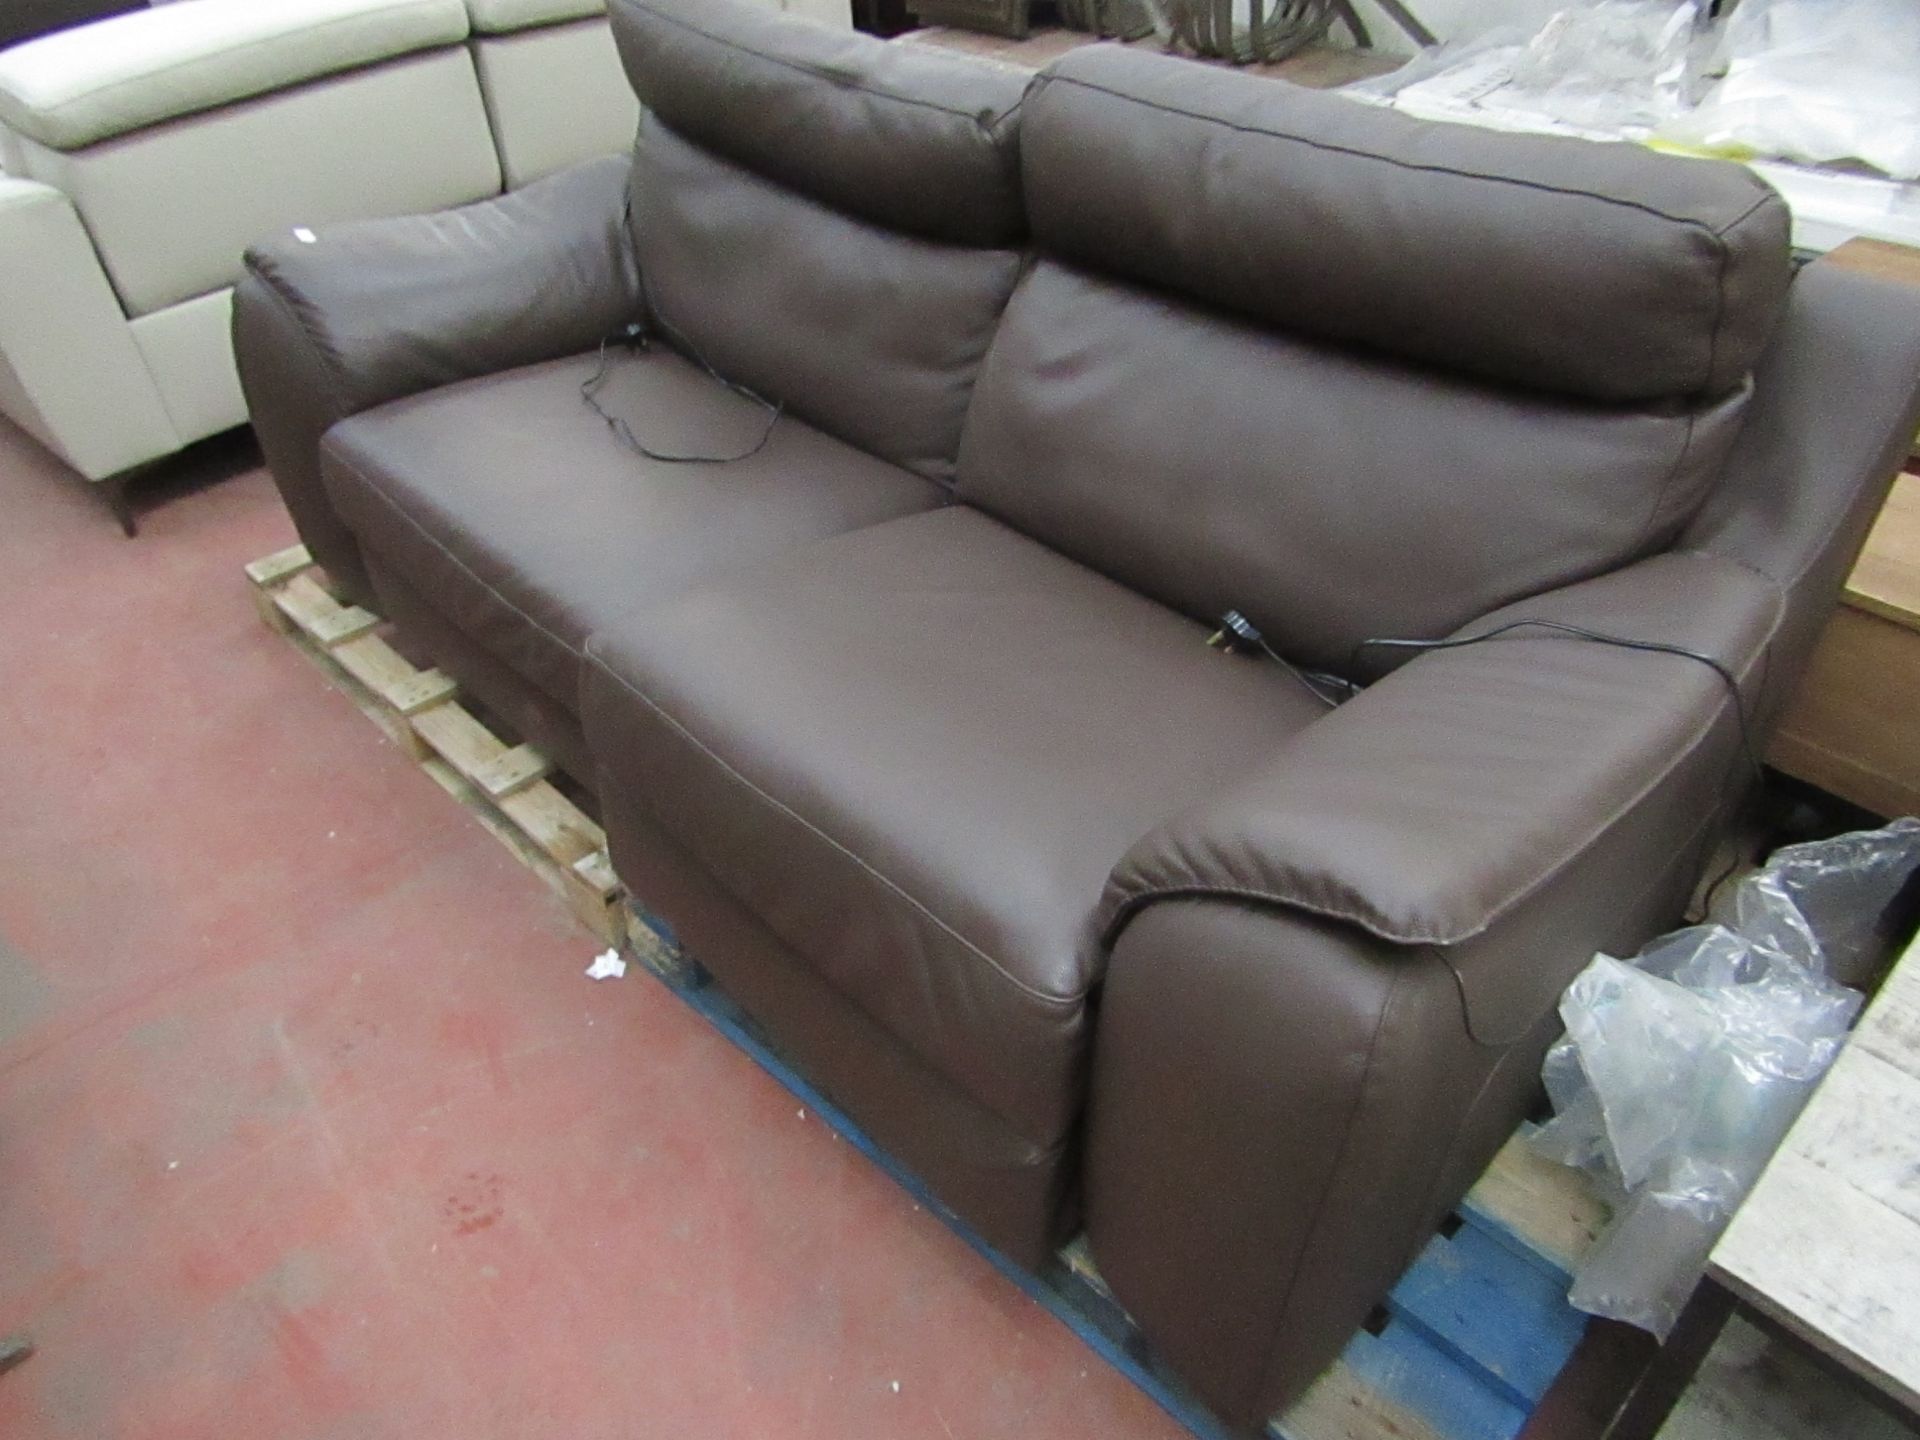 Costco 2 seater leather recliner sofa, untested.